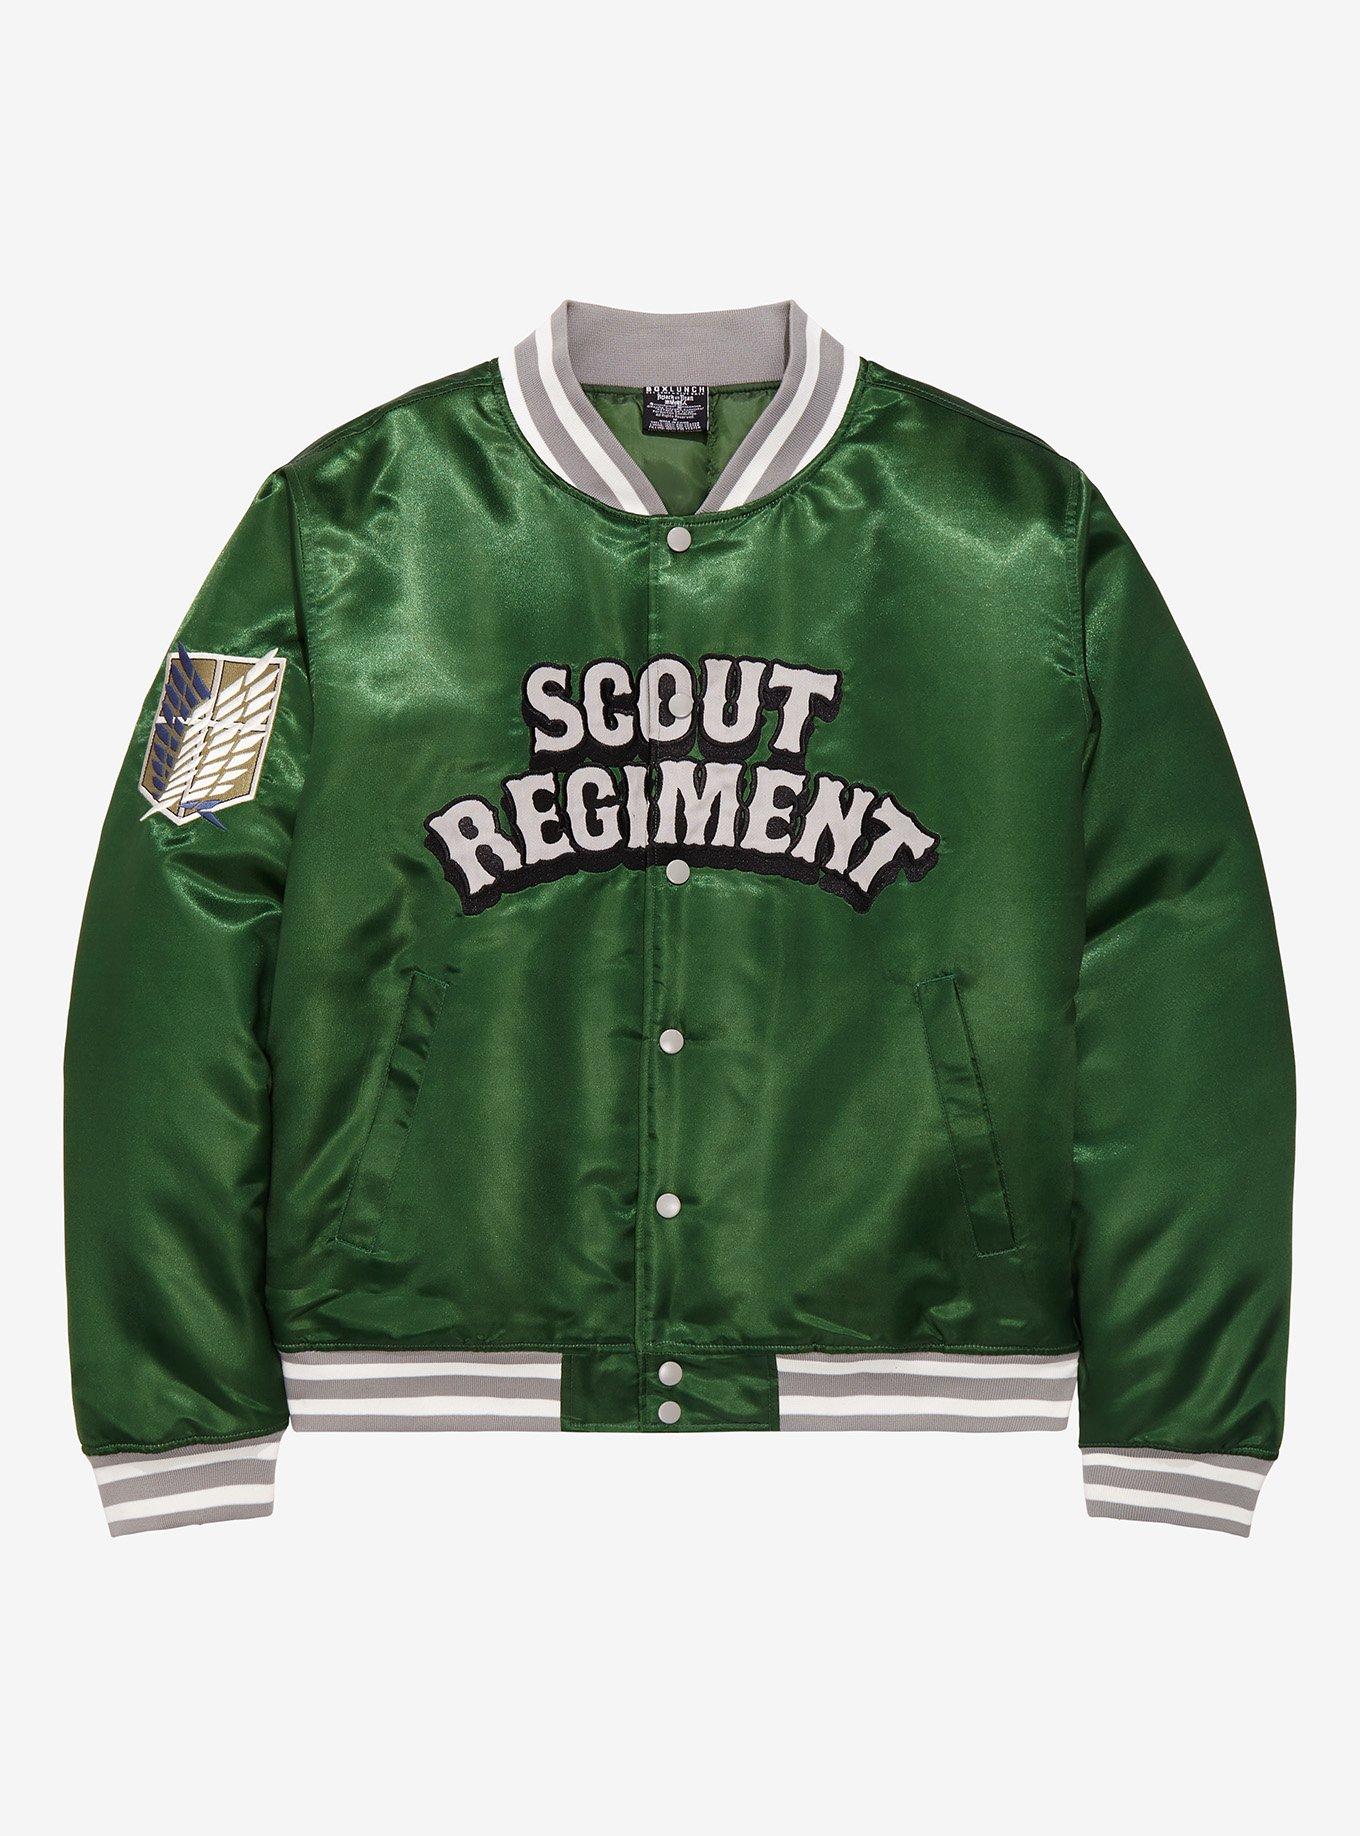 Attack on Titan Scout Regiment Bomber Jacket - BoxLunch Exclusive ...